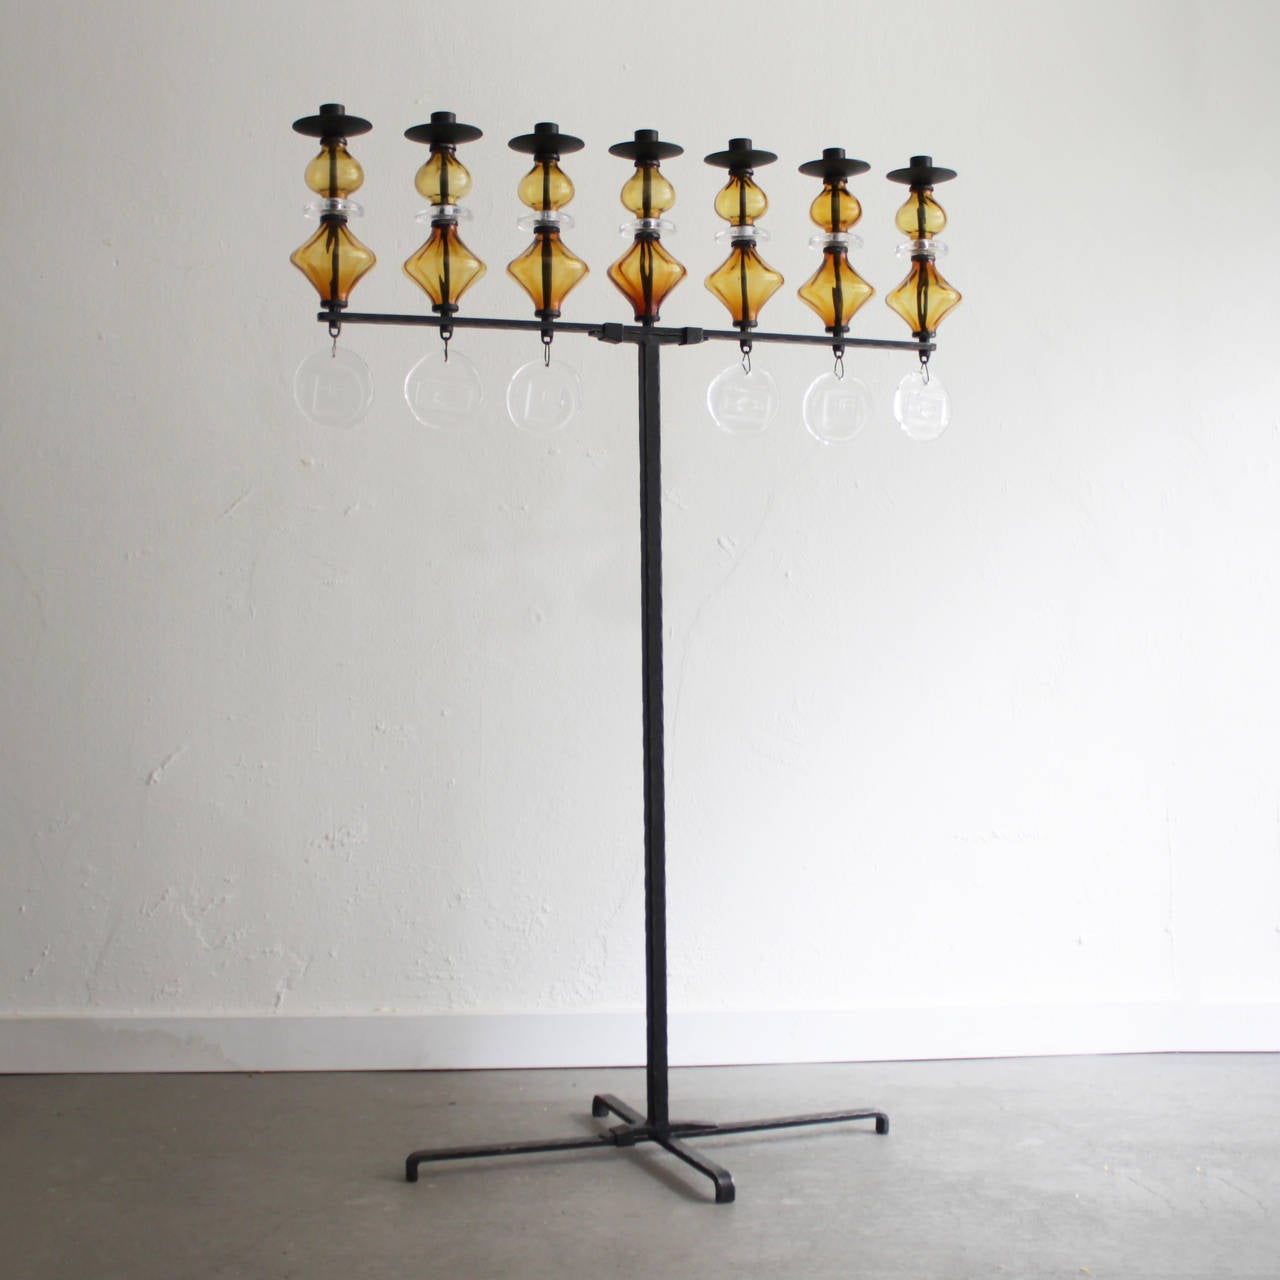 Large candleholder by Erik Hoglund, Sweden. Wrought iron and glass. Clear and amber mouth blown glass by Boda Nova Glassworks and the iron work was done at Axel Stromberg Ironworks.